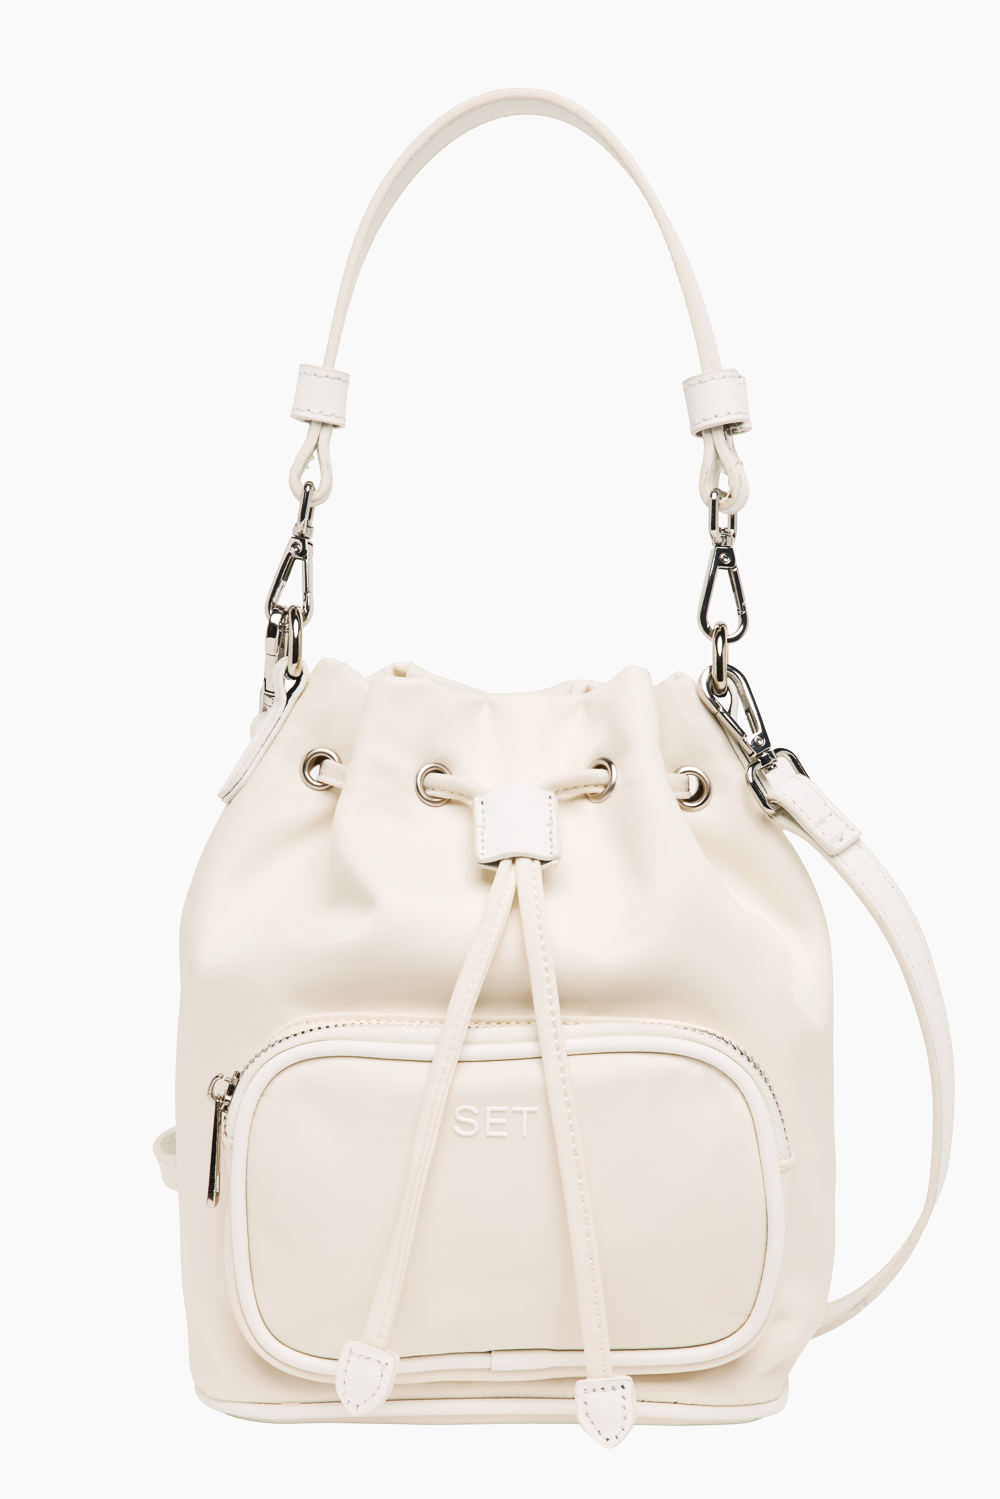 EVERYDAY BUCKET BAG - BLANC Featured Image